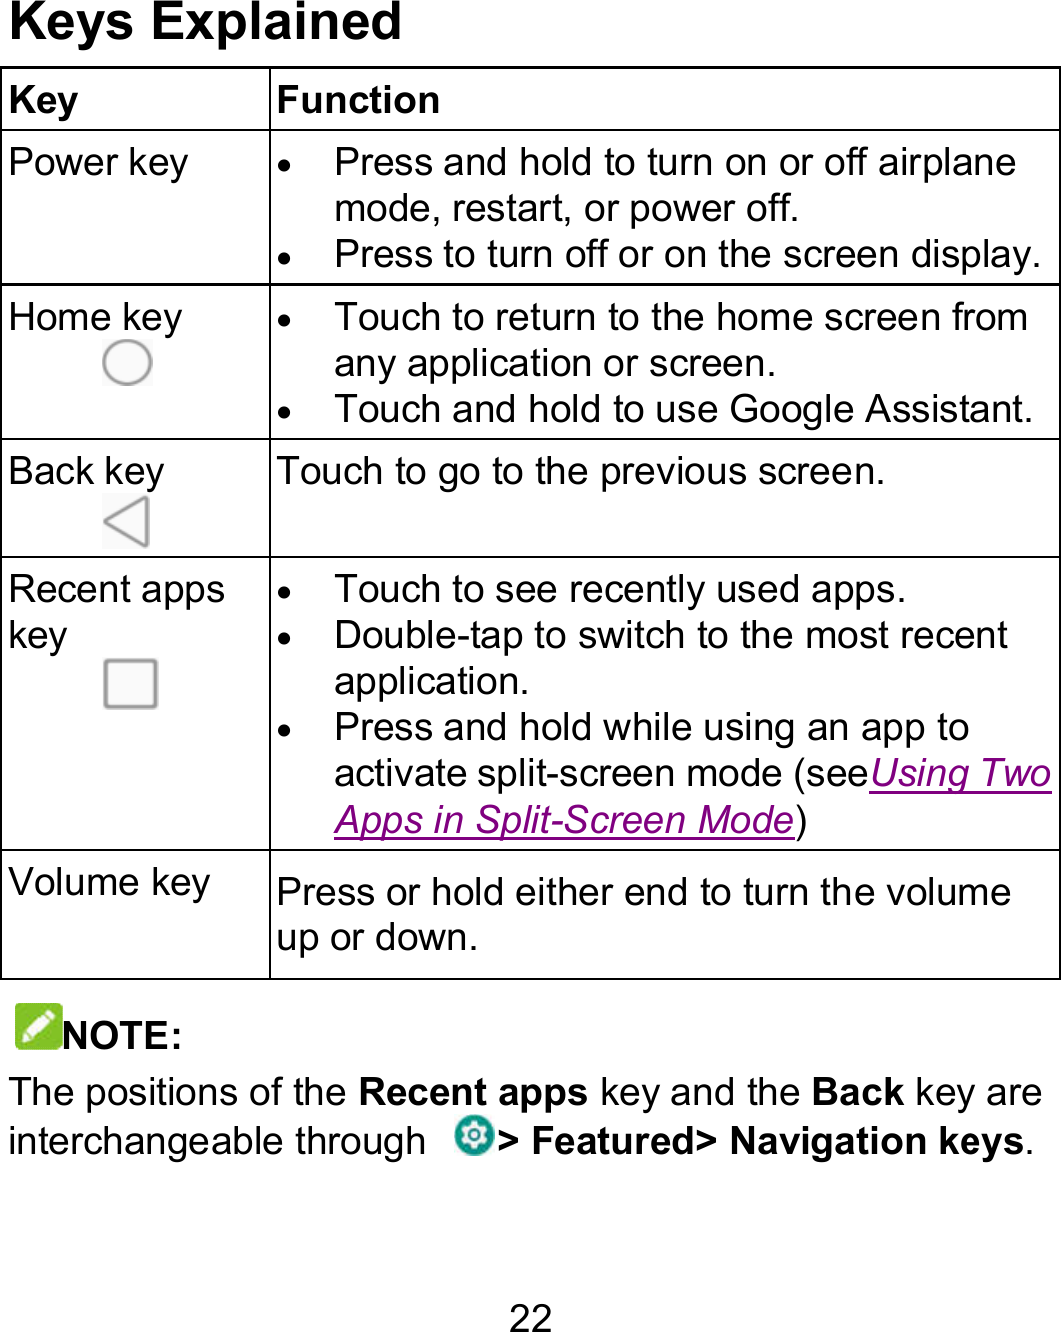 22 Keys Explained Key  Function Power key  Press and hold to turn on or off airplane mode, restart, or power off.  Press to turn off or on the screen display.Home key   Touch to return to the home screen from any application or screen.  Touch and hold to use Google AssistantBack key  Touch to go to the previous screen. Recent apps key   Touch to see recently used apps.  Double-tap to switch to the most recent application.  Press and hold while using an app to activate split-screen mode (seeUsing Two Apps in Split-Screen Mode) Volume key  Press or hold either end to turn the volume up or down.  NOTE: The positions of the Recent apps key and the Back key are interchangeable through  &gt; Featured&gt; Navigation keysand hold to turn on or off airplane Press to turn off or on the screen display. Touch to return to the home screen from Assistant. tap to switch to the most recent Press and hold while using an app to Using Two turn the volume key are &gt; Navigation keys. 